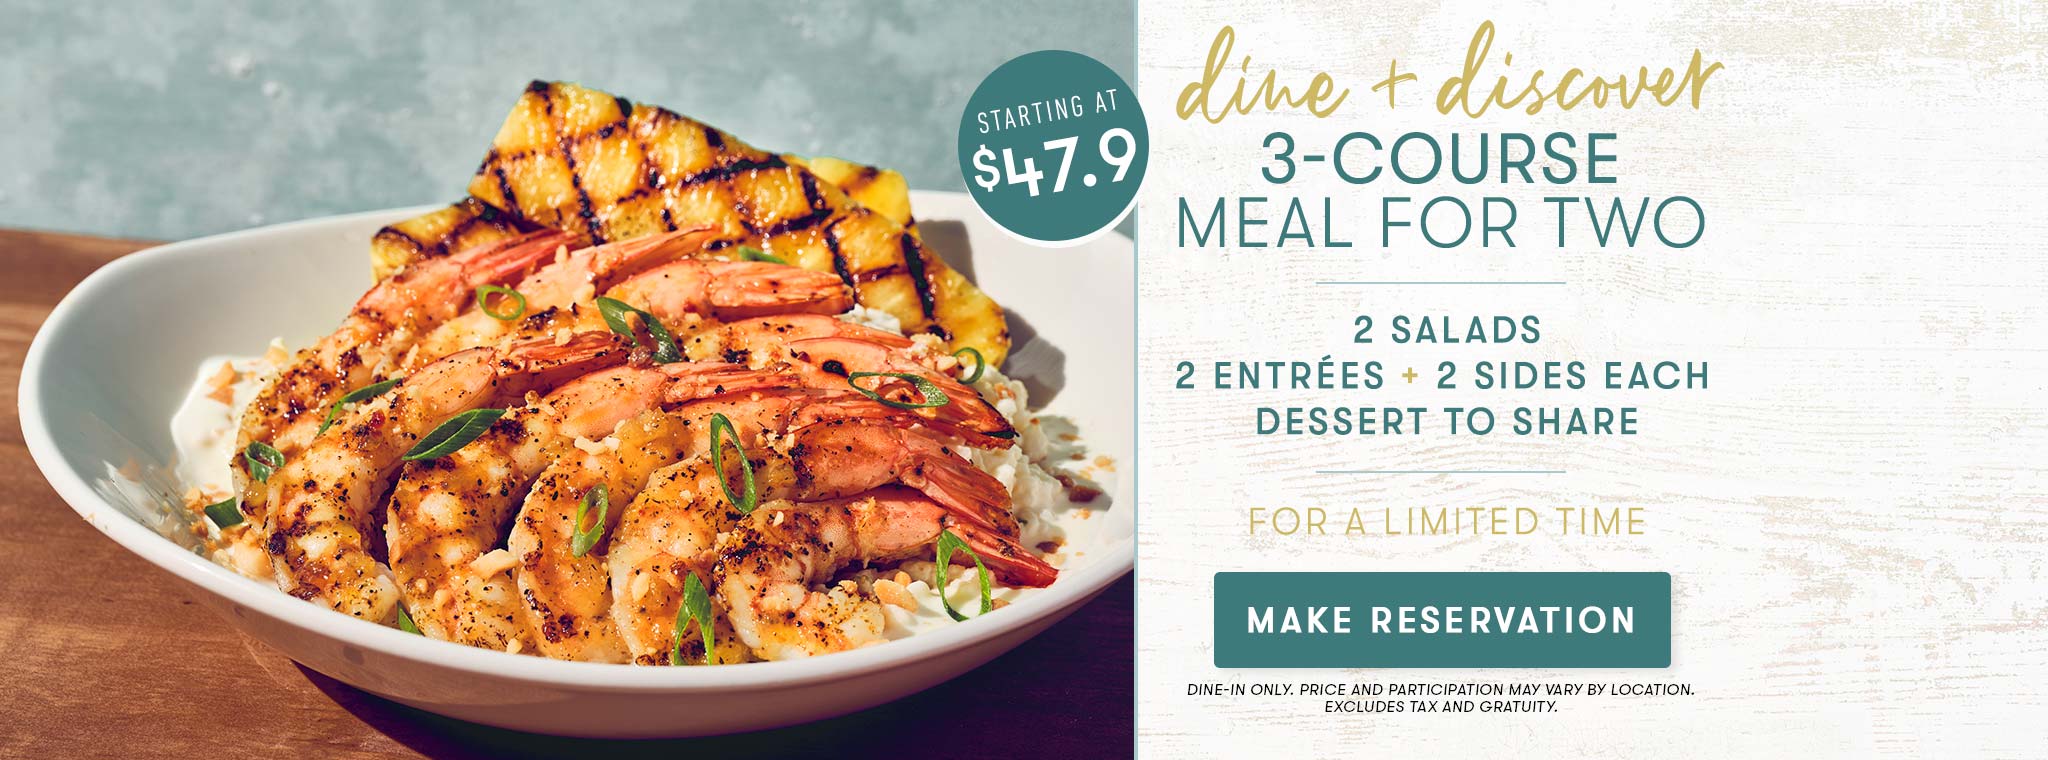 Dine & Discover 3-Course Meal For Two Starting At $47.9